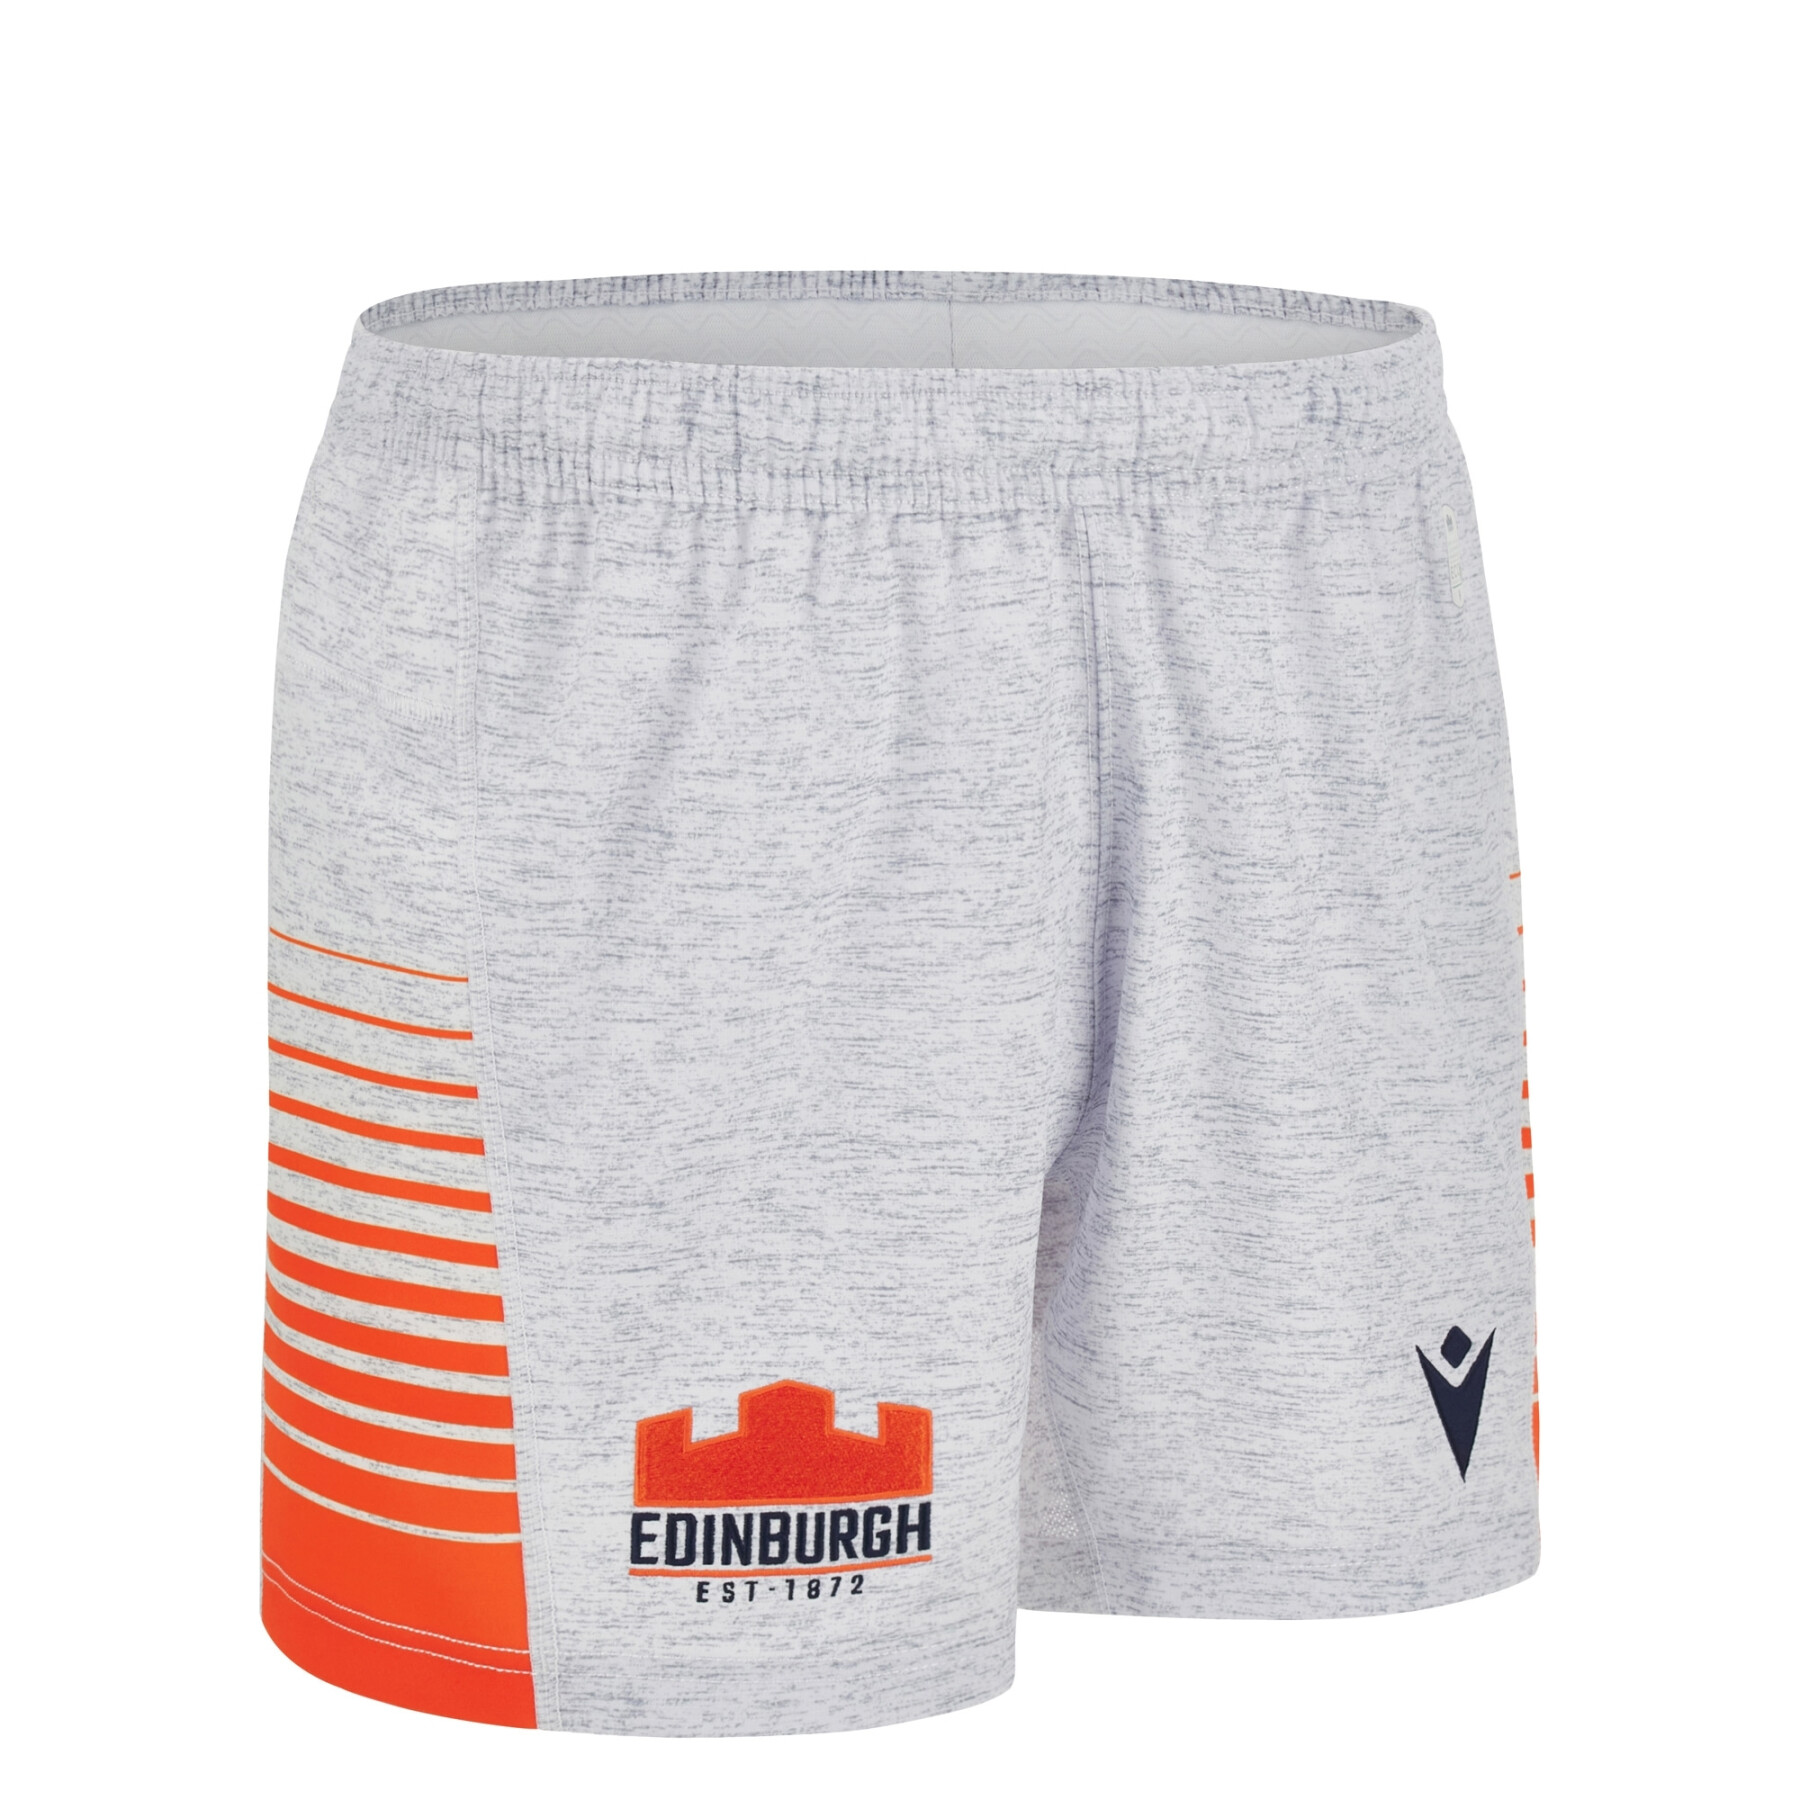 Authentic outdoor shorts for kids Édimbourg Rugby